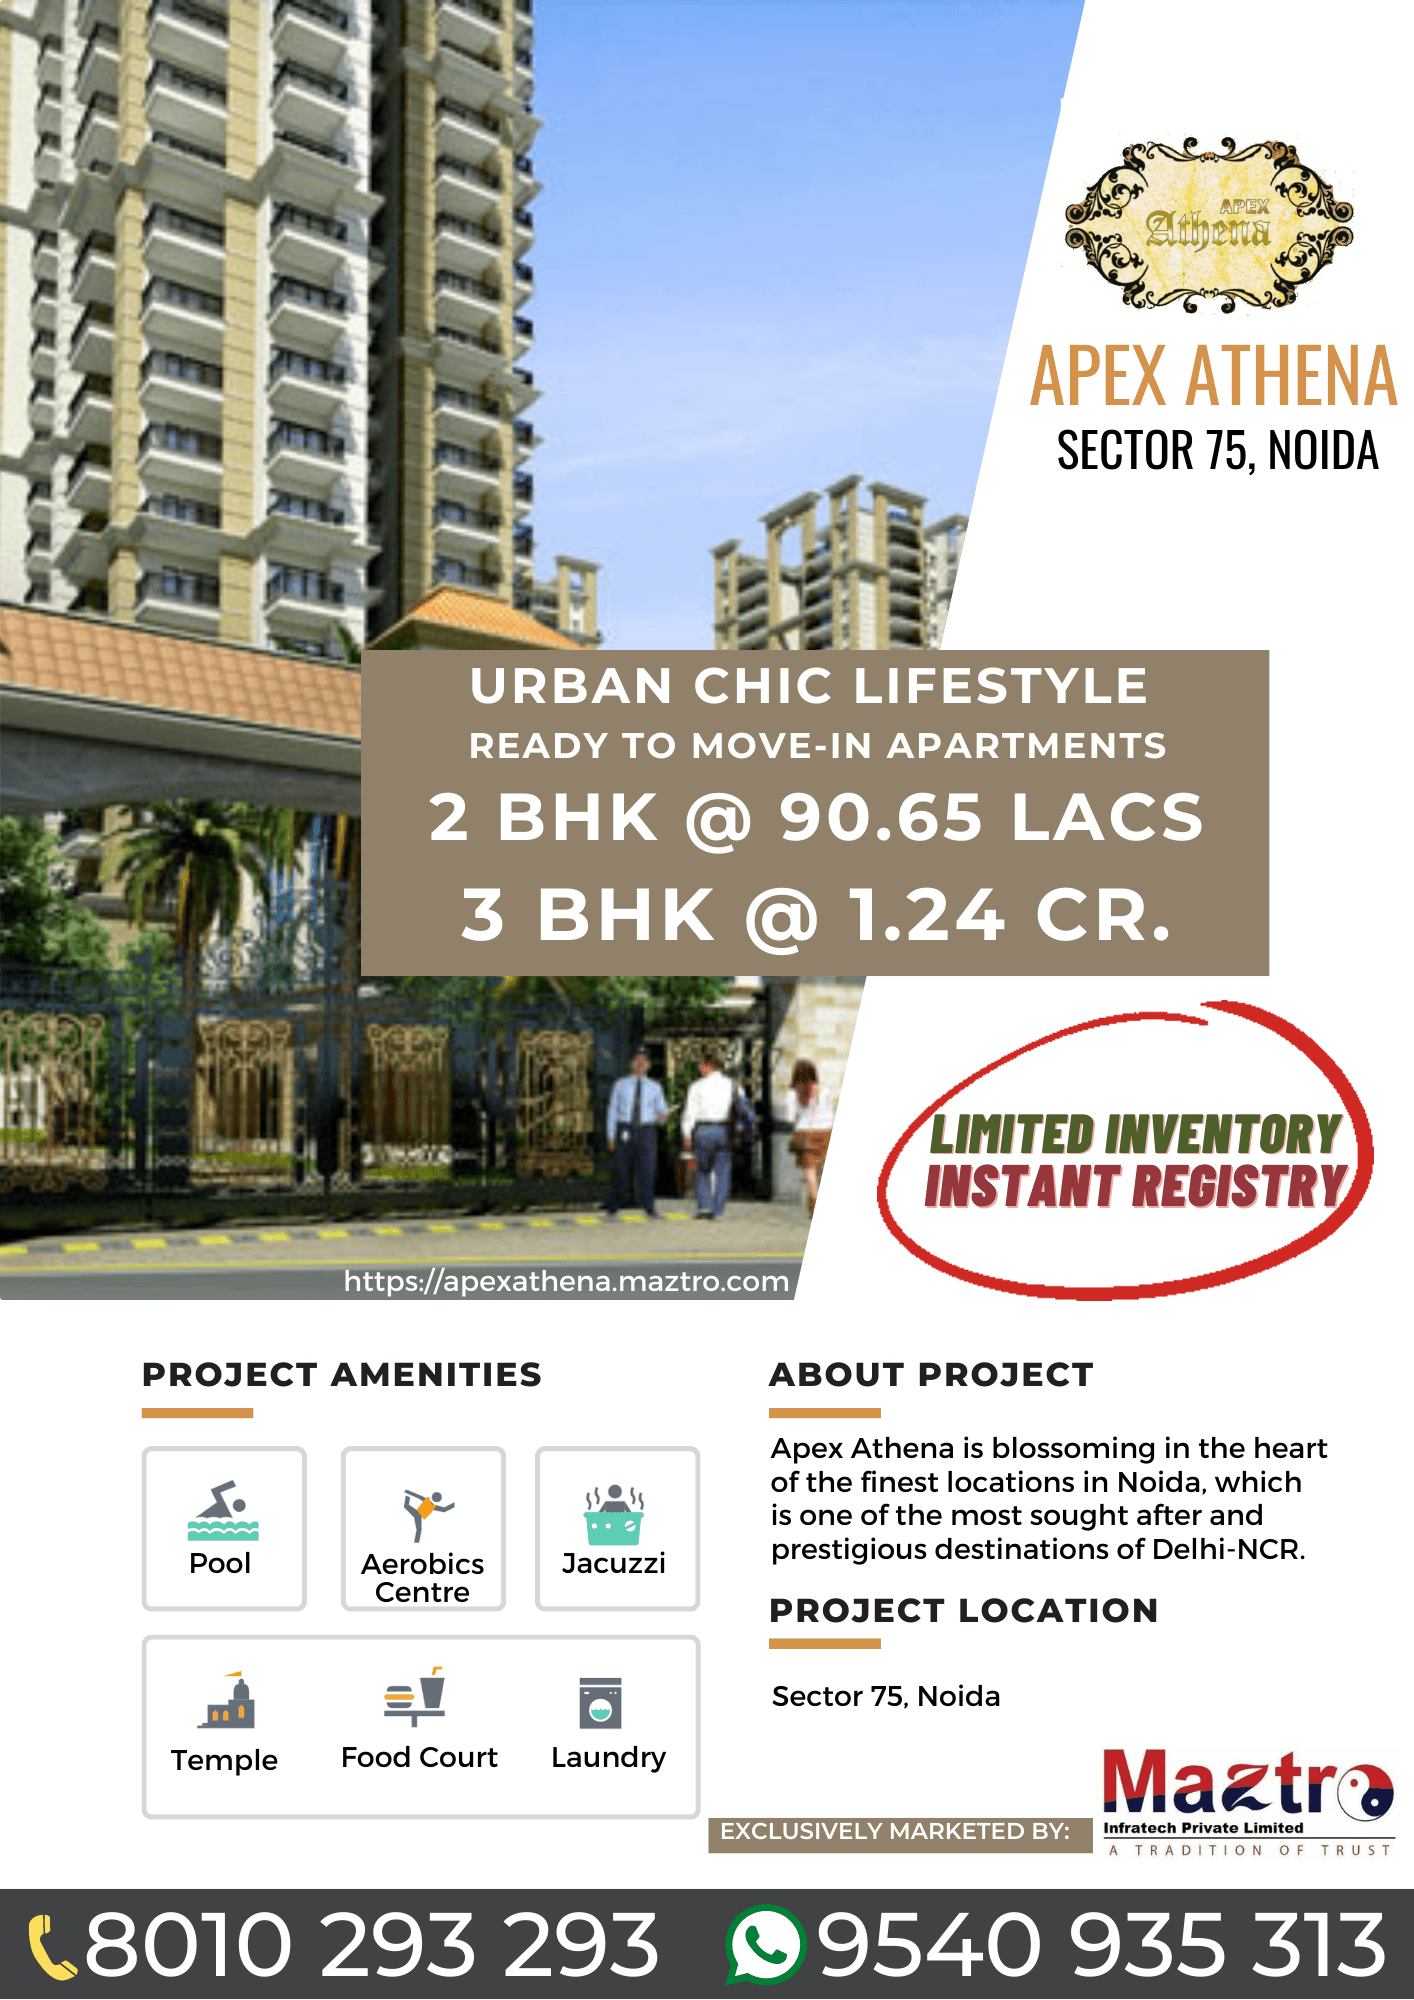 3 BHK Flat for sale in only Rs. 1.24 Cr. in Apex Athena Sector 75 Noida | Best Deal Guaranteed by Maztro Infratech